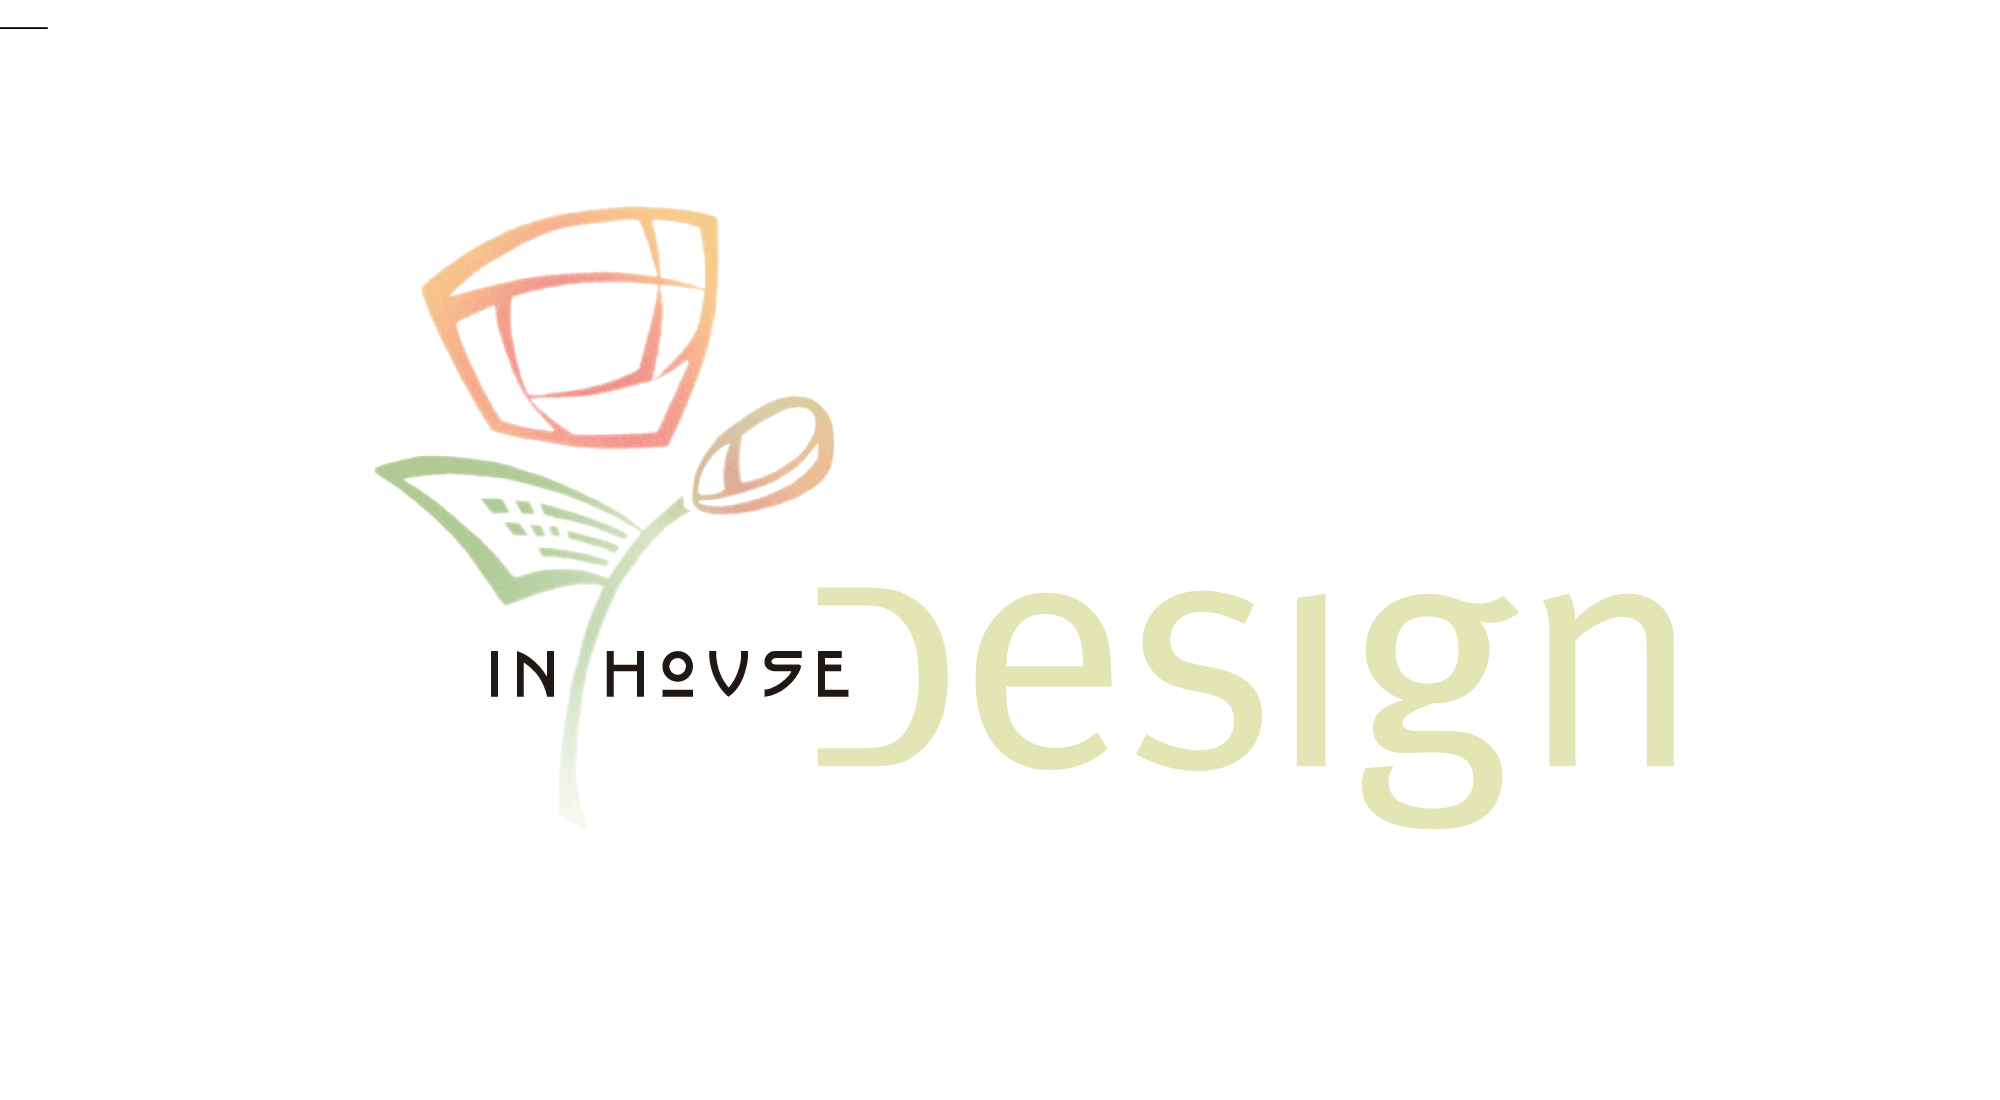 Image of InHouse Design icon and logotype, a stylized computer in the form of a rose stencil in the Arts and Crafts style